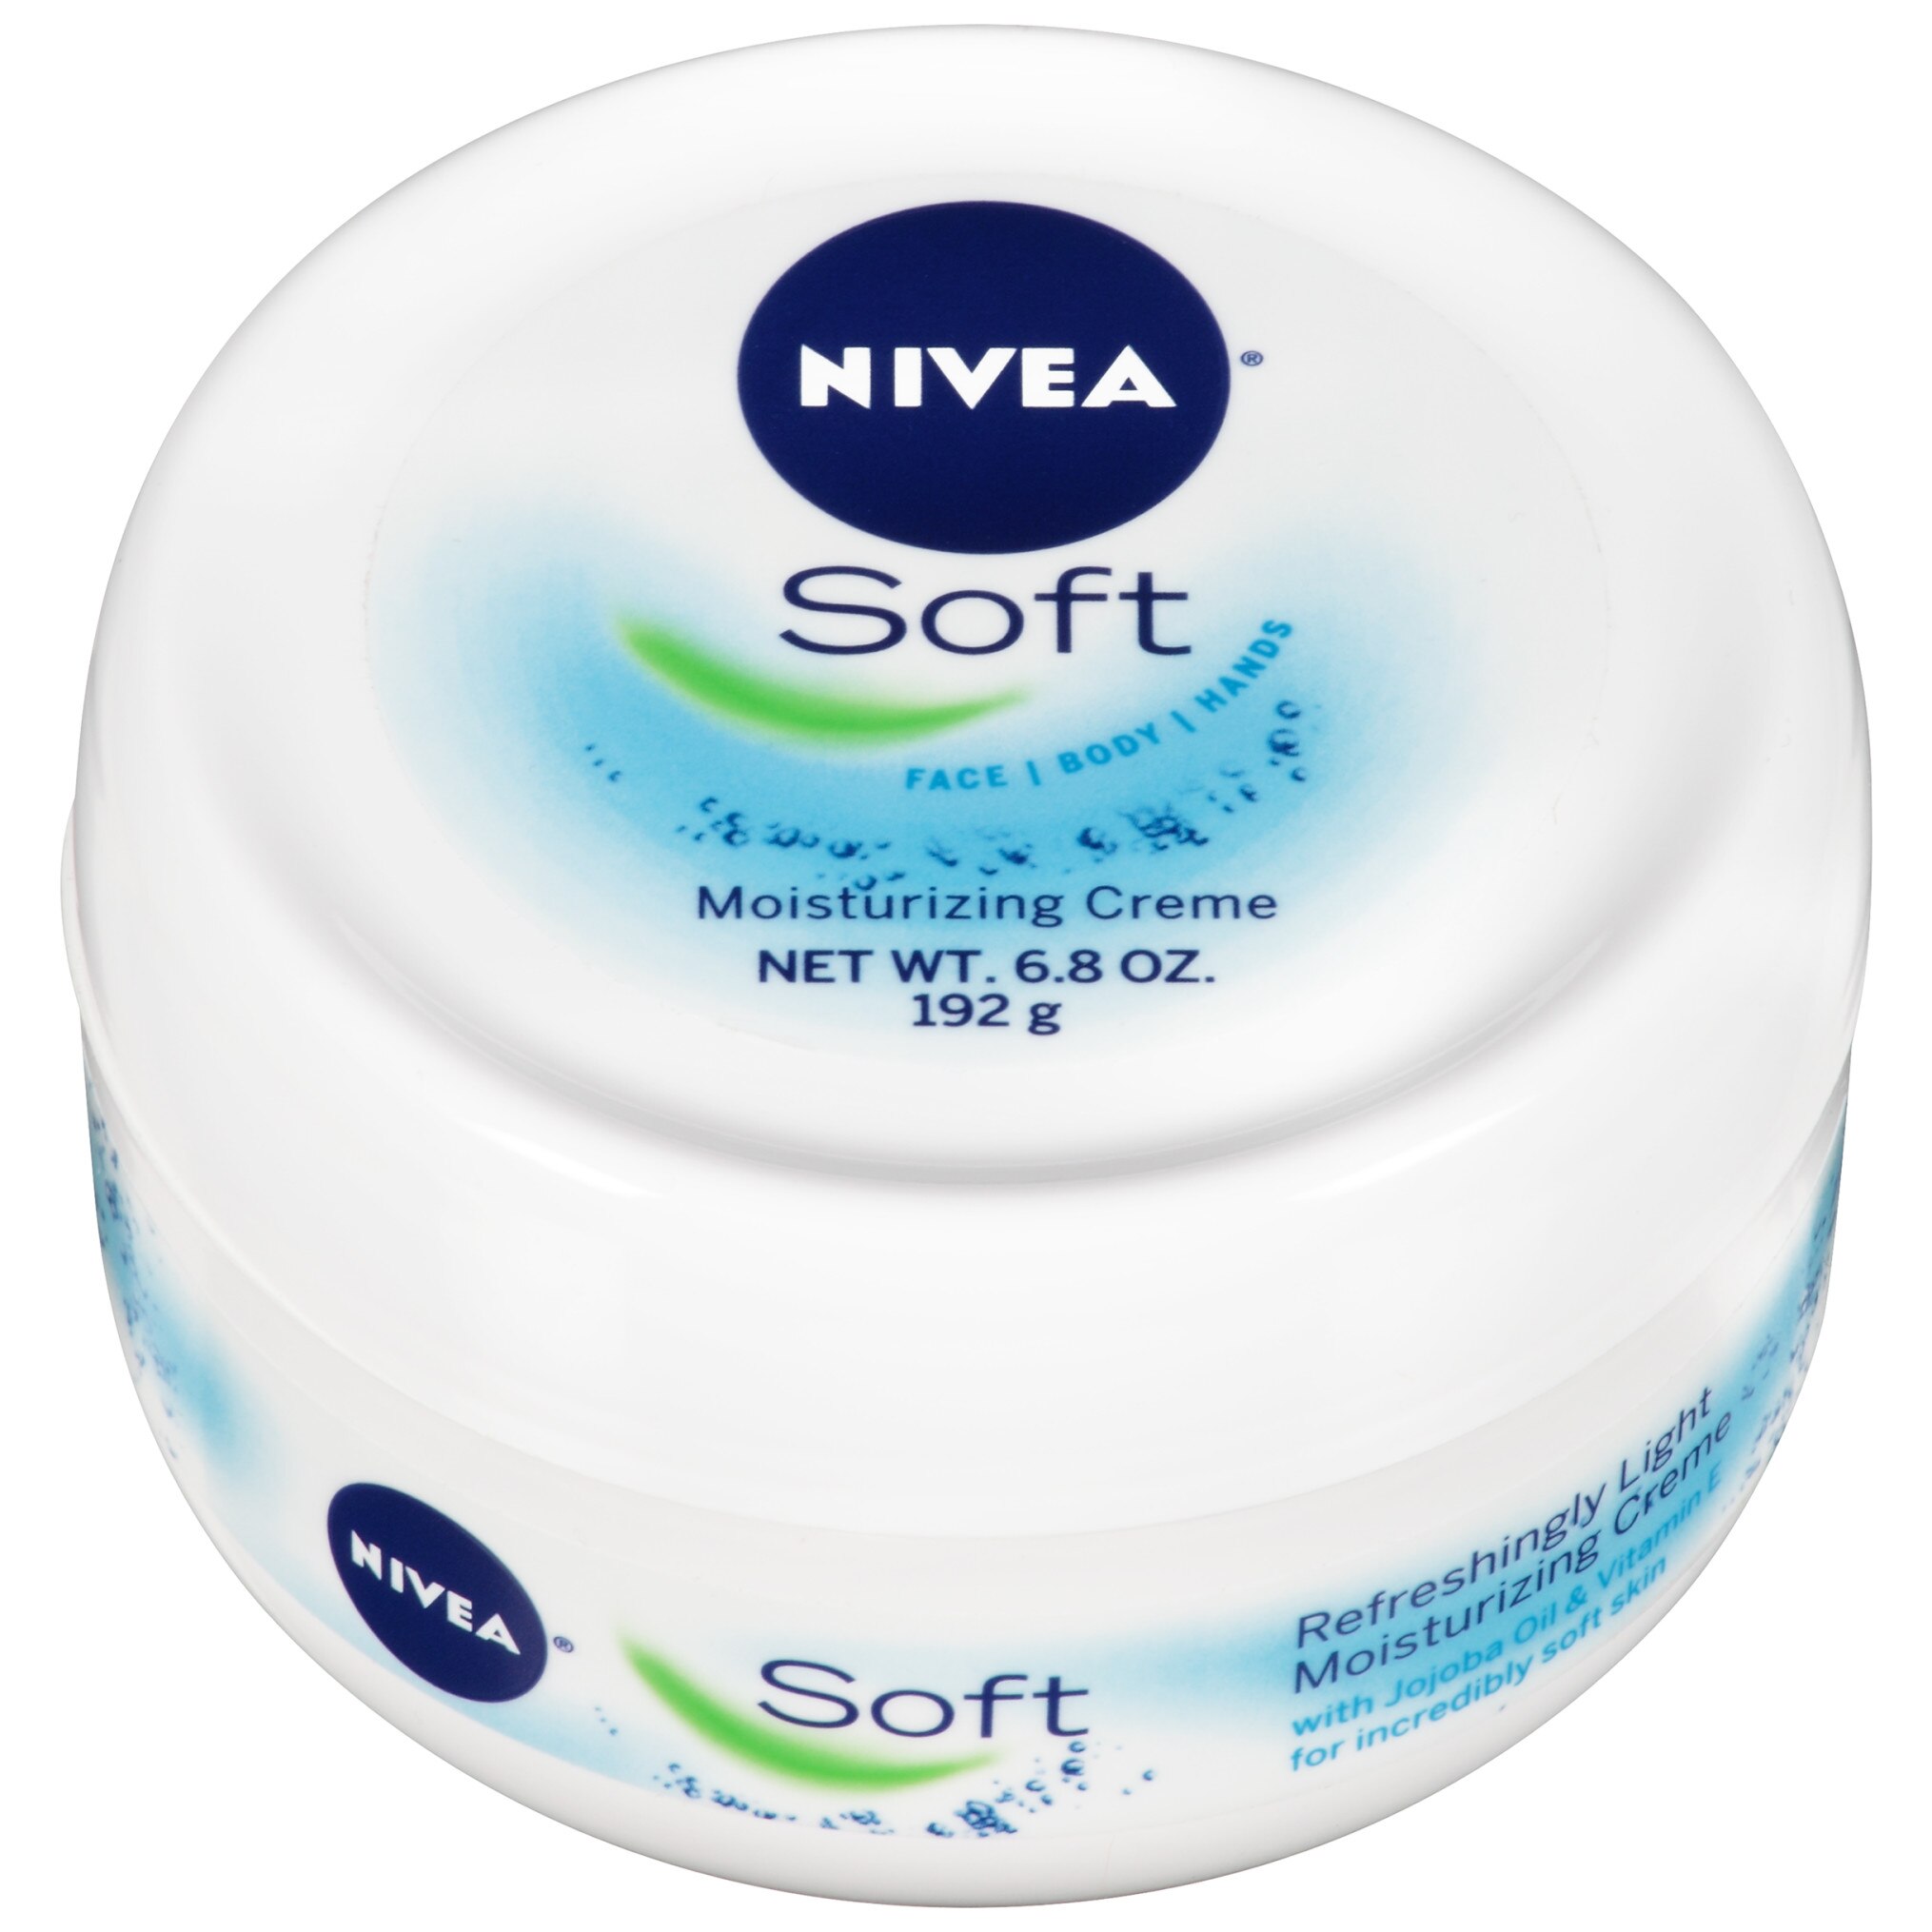 Corporation Logisch cruise NIVEA Soft Moisturizing Creme Body, Face and Hand Cream, 6.8 OZ | Pick Up  In Store TODAY at CVS